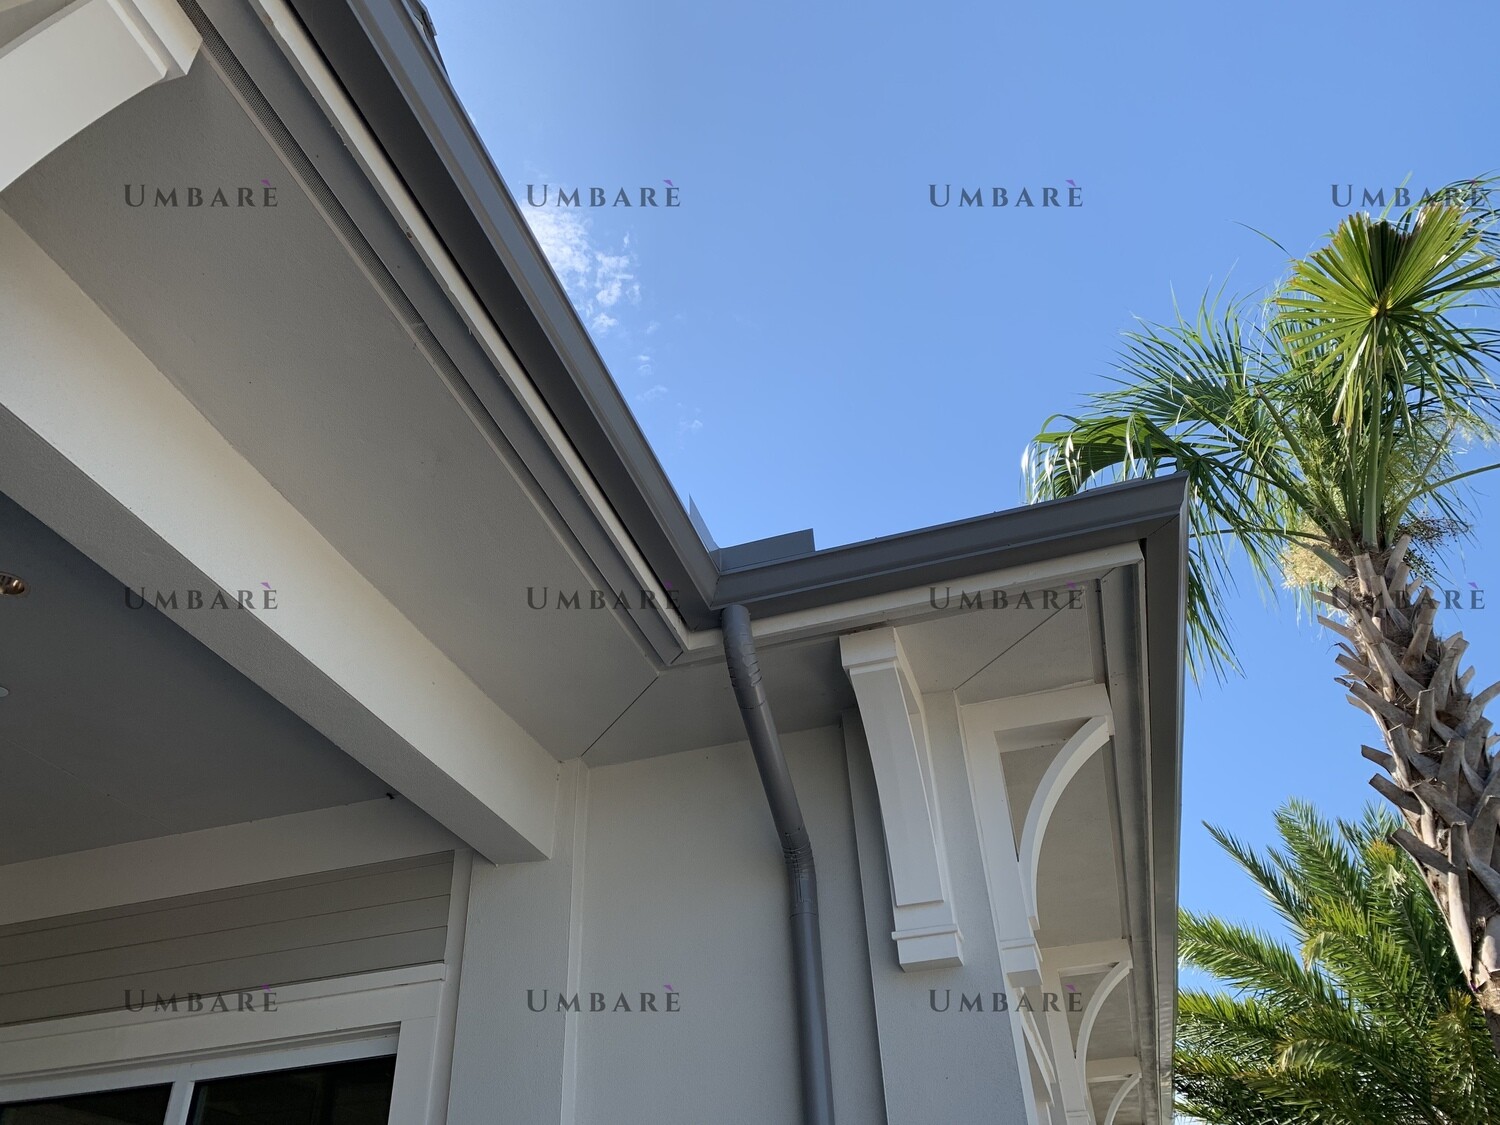 Umbare Gutter & Fascia Refinish Packages